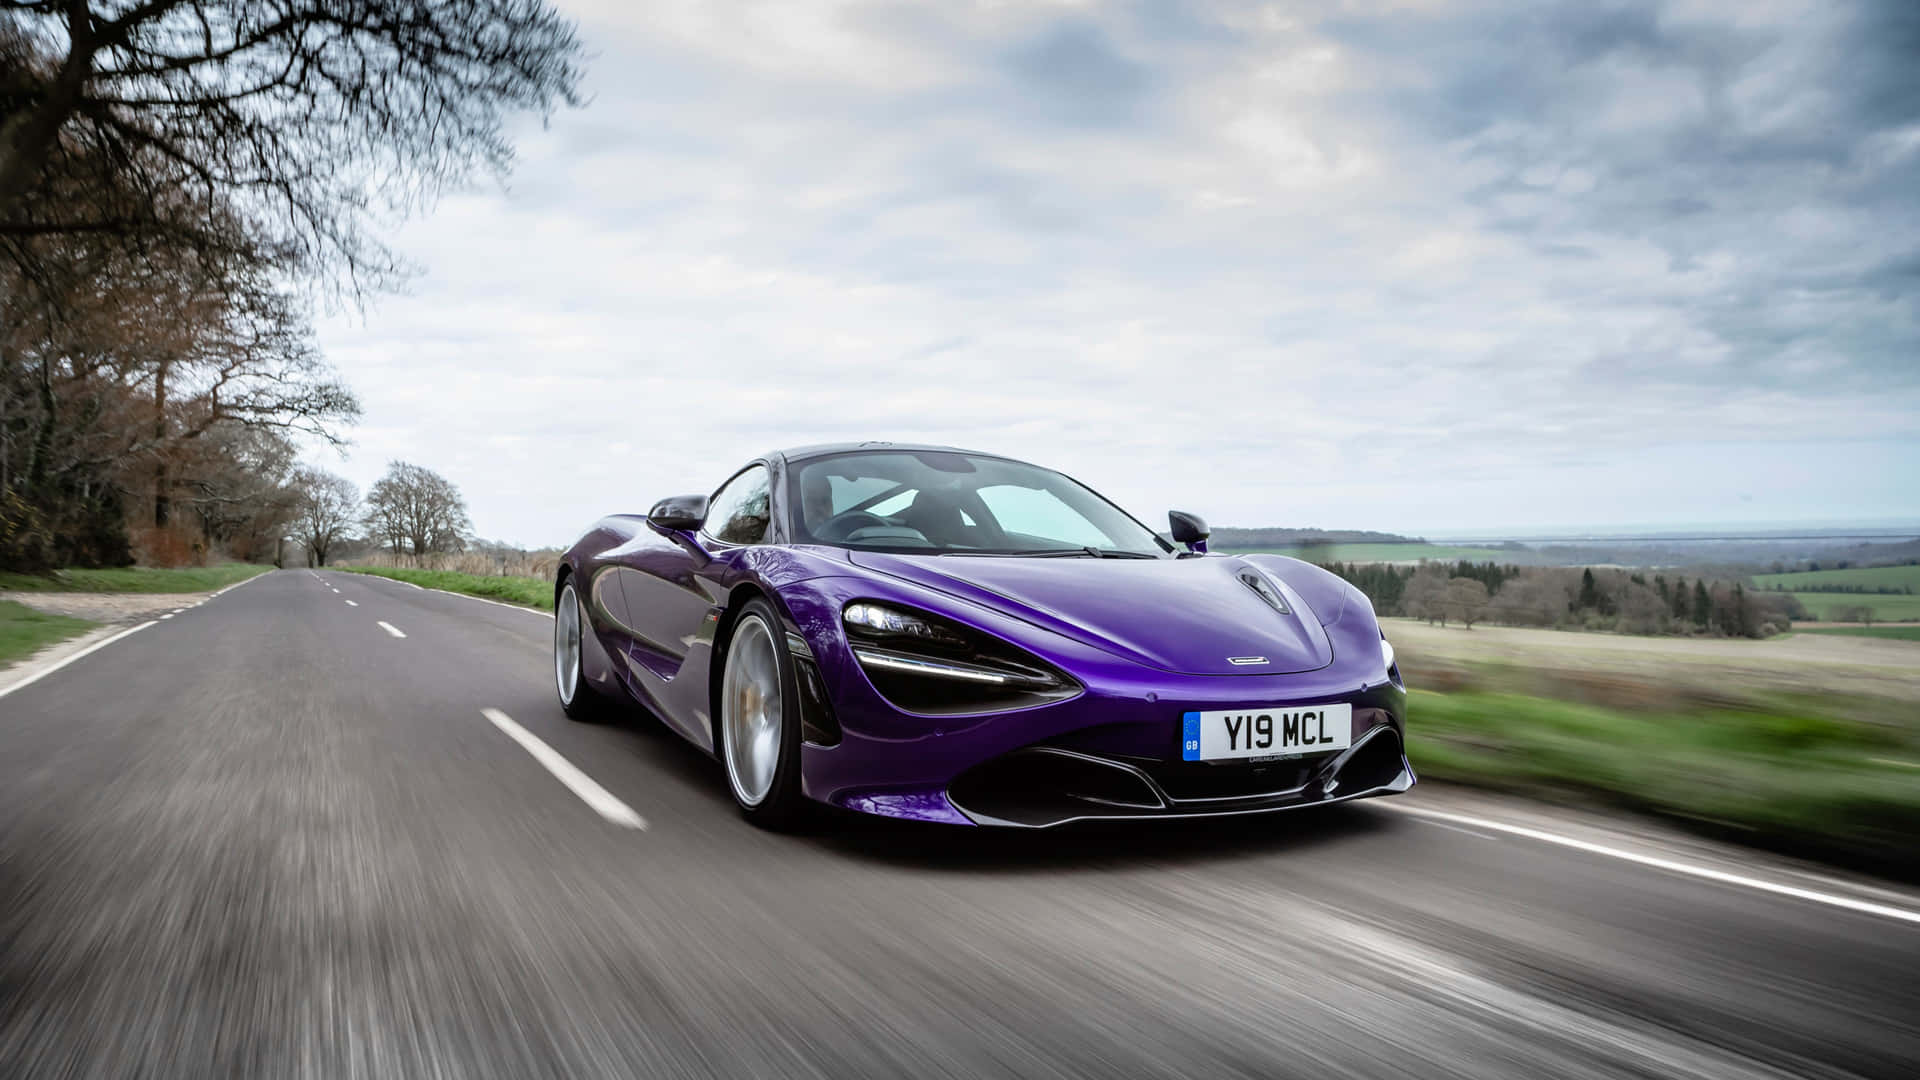 "The stunning 4k McLaren 720s, a sports car of excellence!"